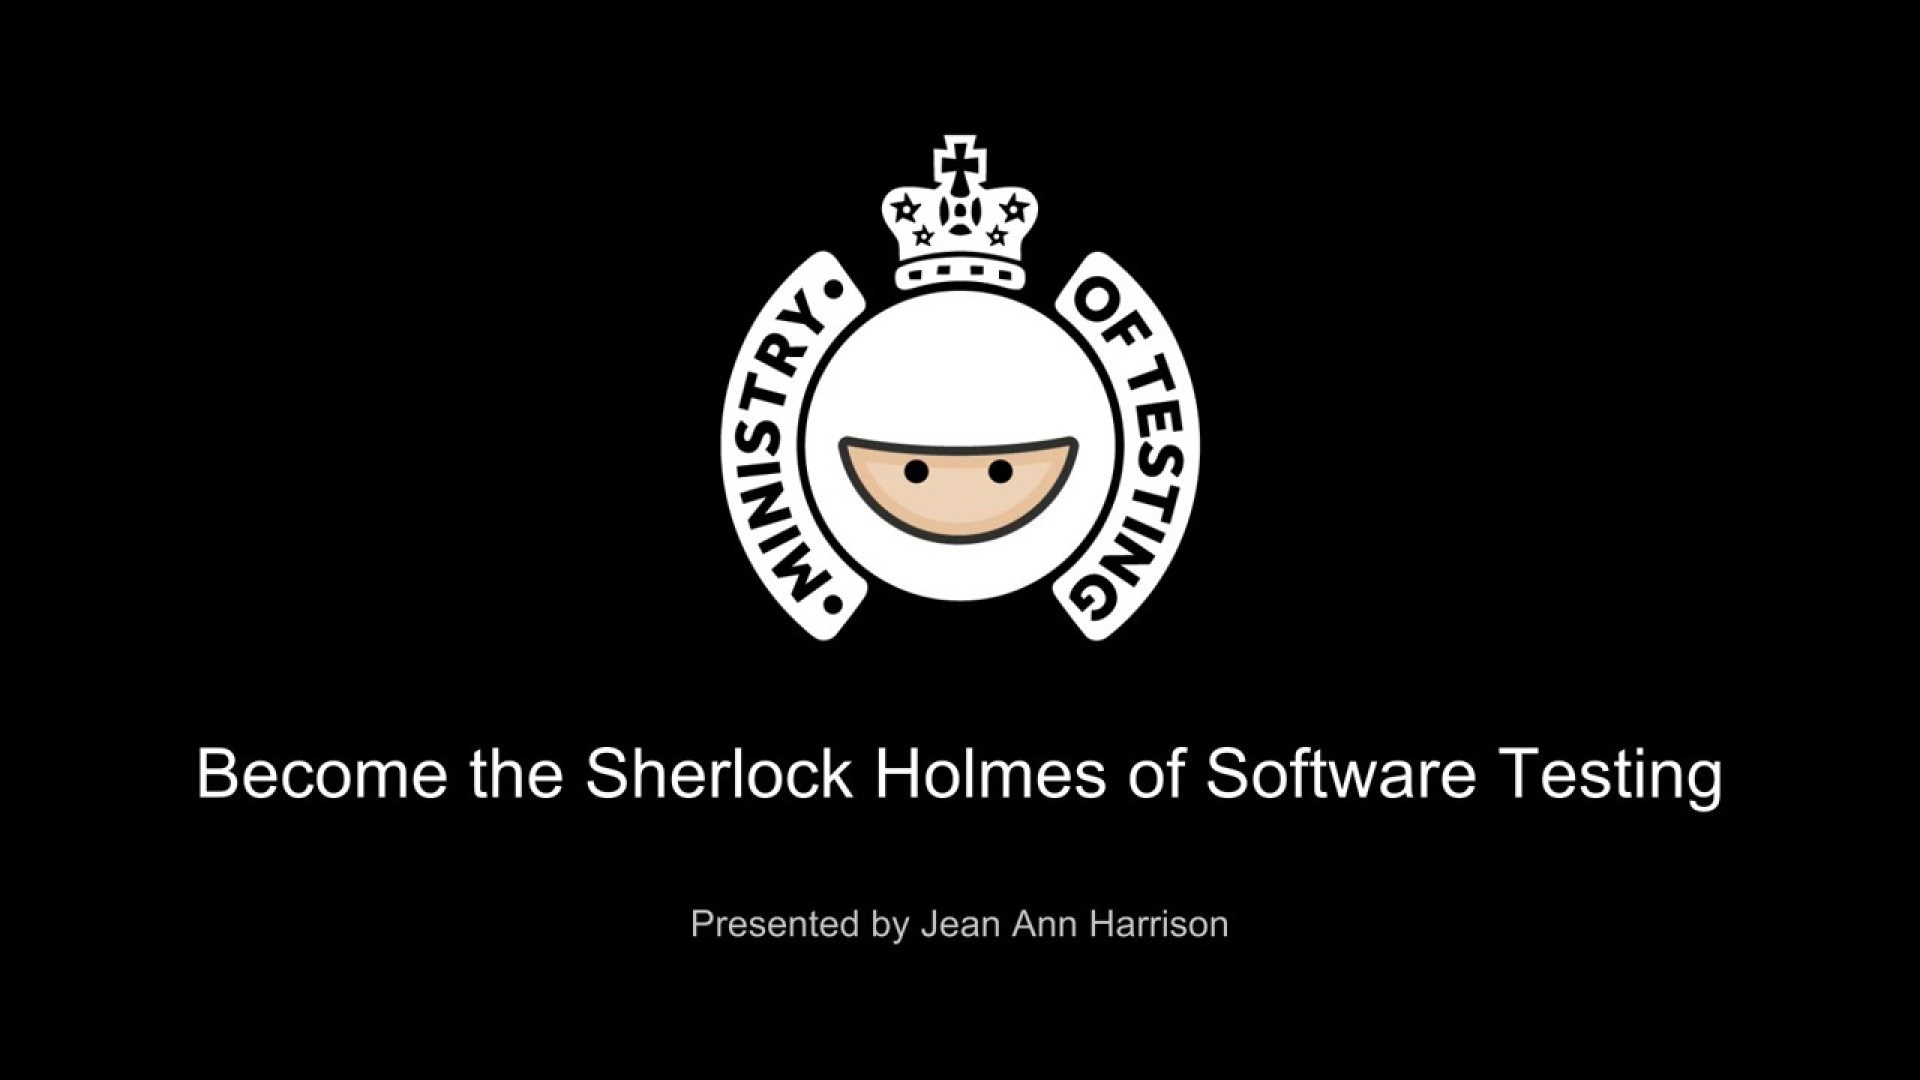 Become The Sherlock Holmes of Software Testing